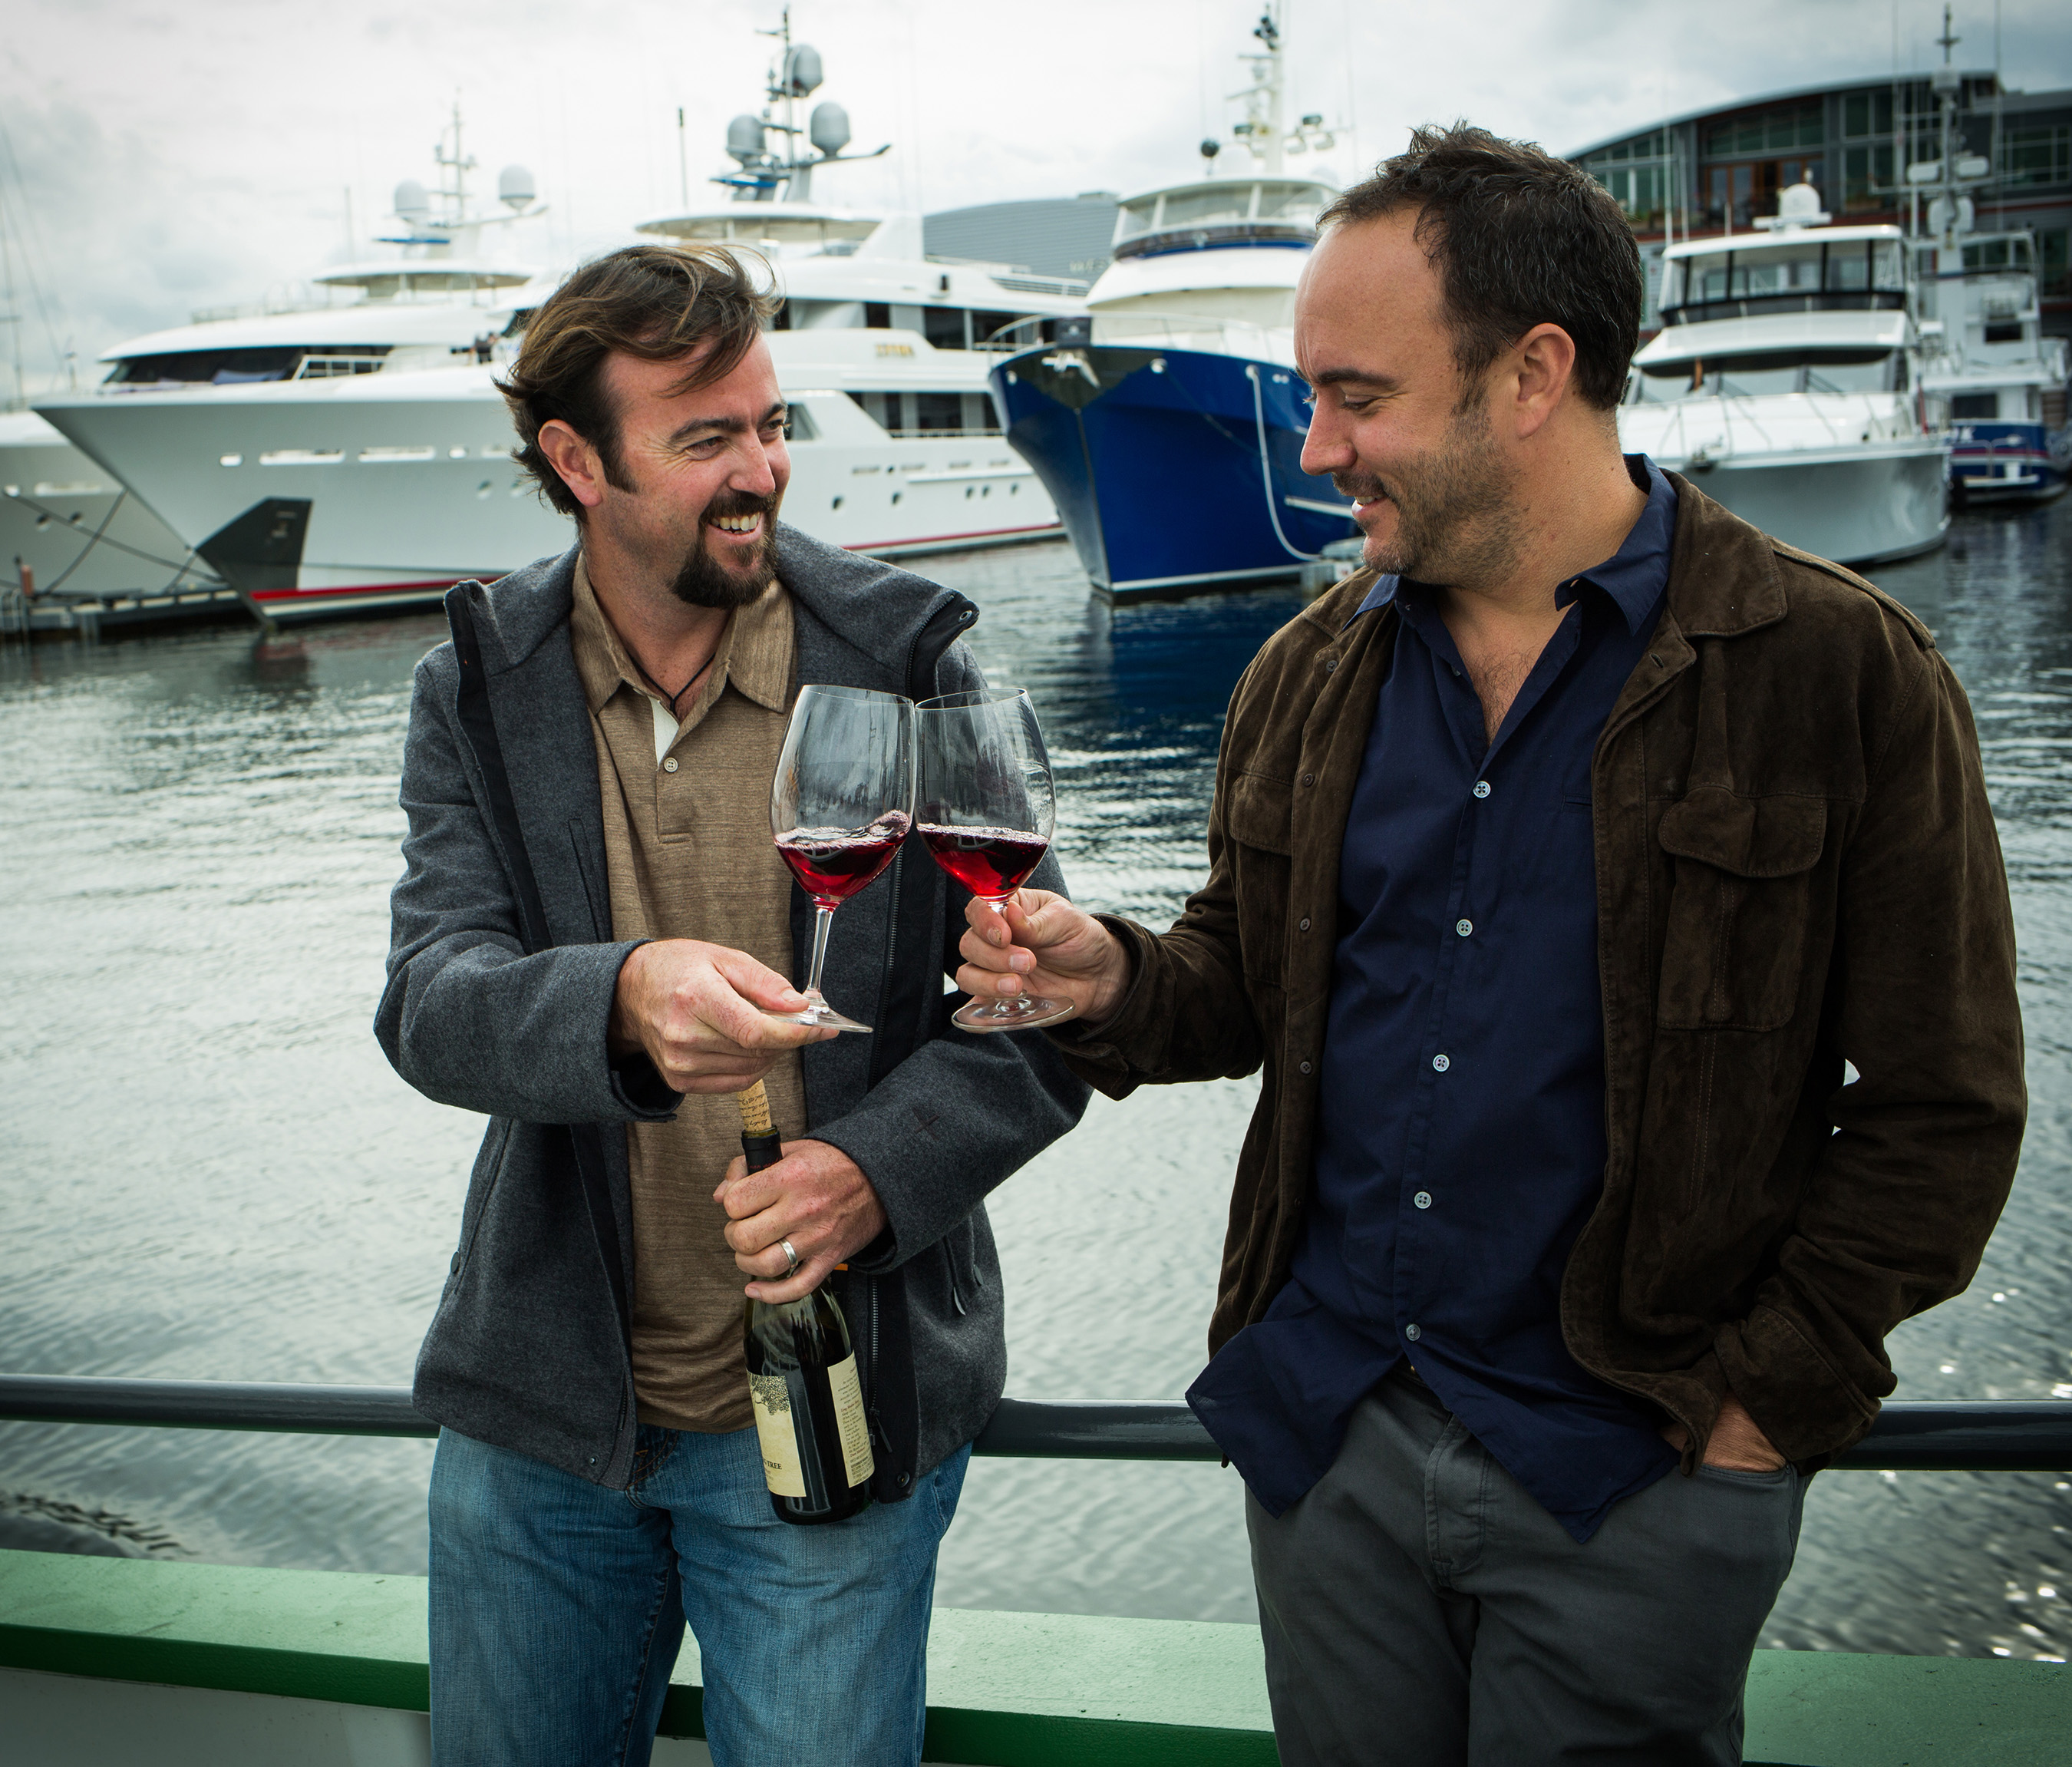 Award-winning winemaker Sean McKenzie and musician Dave Matthews collaborate together on The Dreaming Tree Wines ? A California based wine brand.